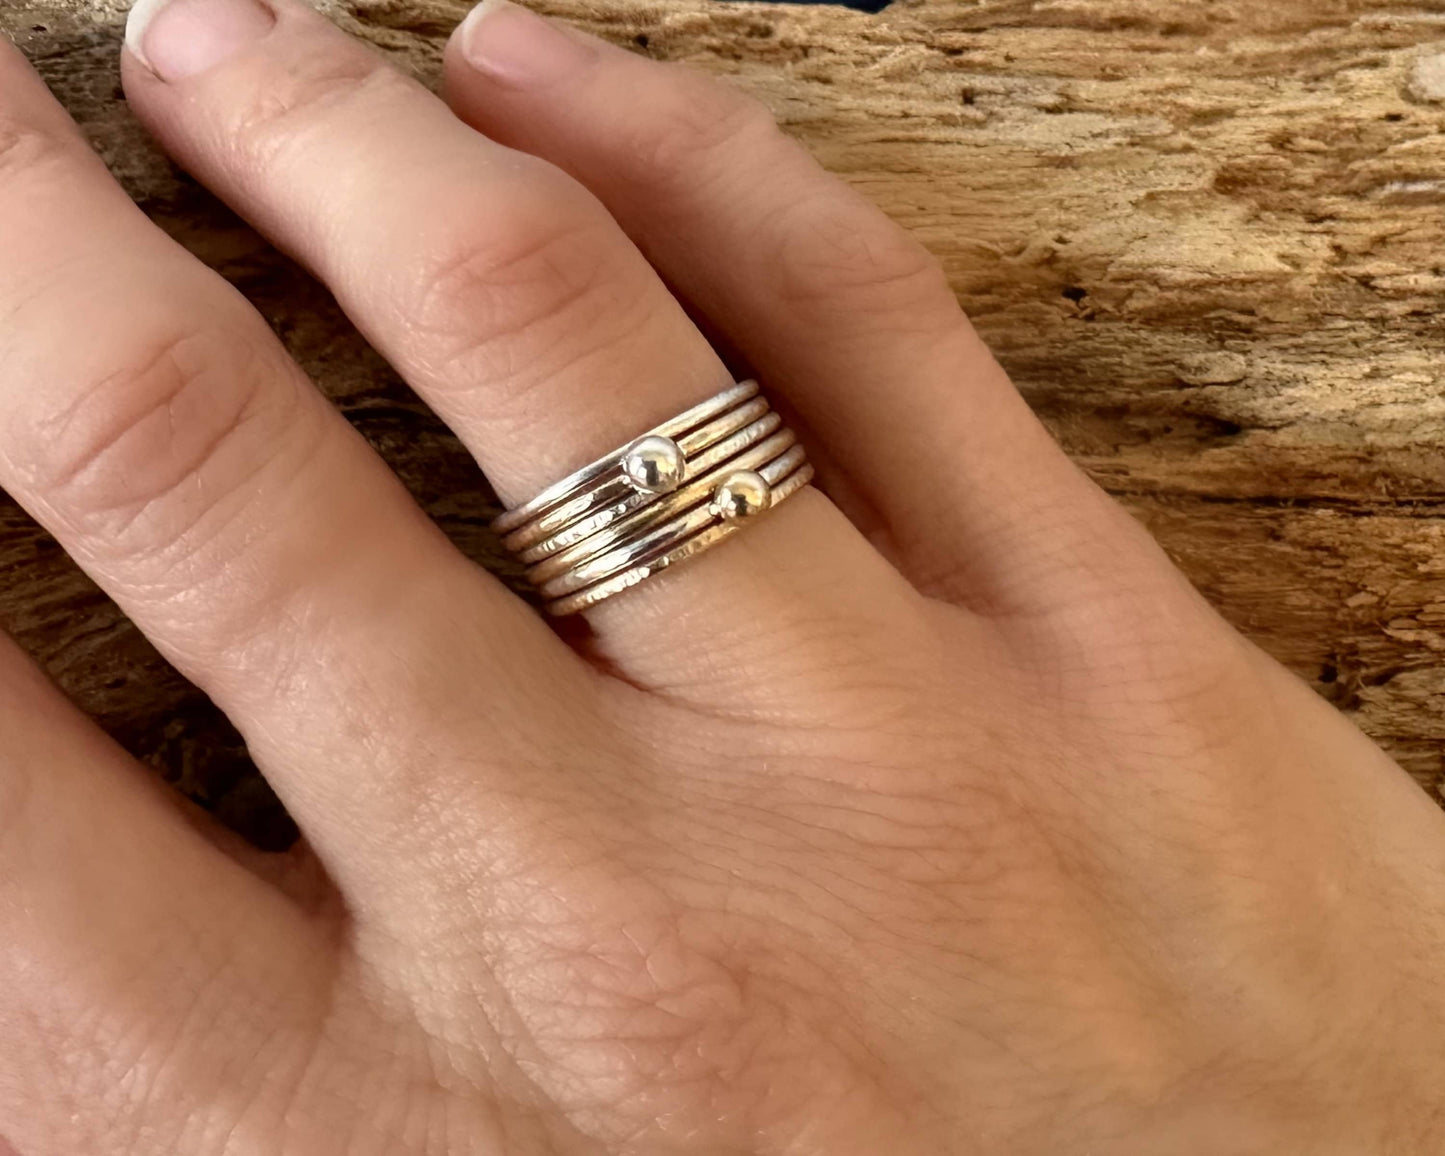 Solid 9ct Gold Stack of Three Stacking Rings, Hallmarked Gold Stacking Ring Set, Two Plain and Shiny and One Ripple Hammered Pattern